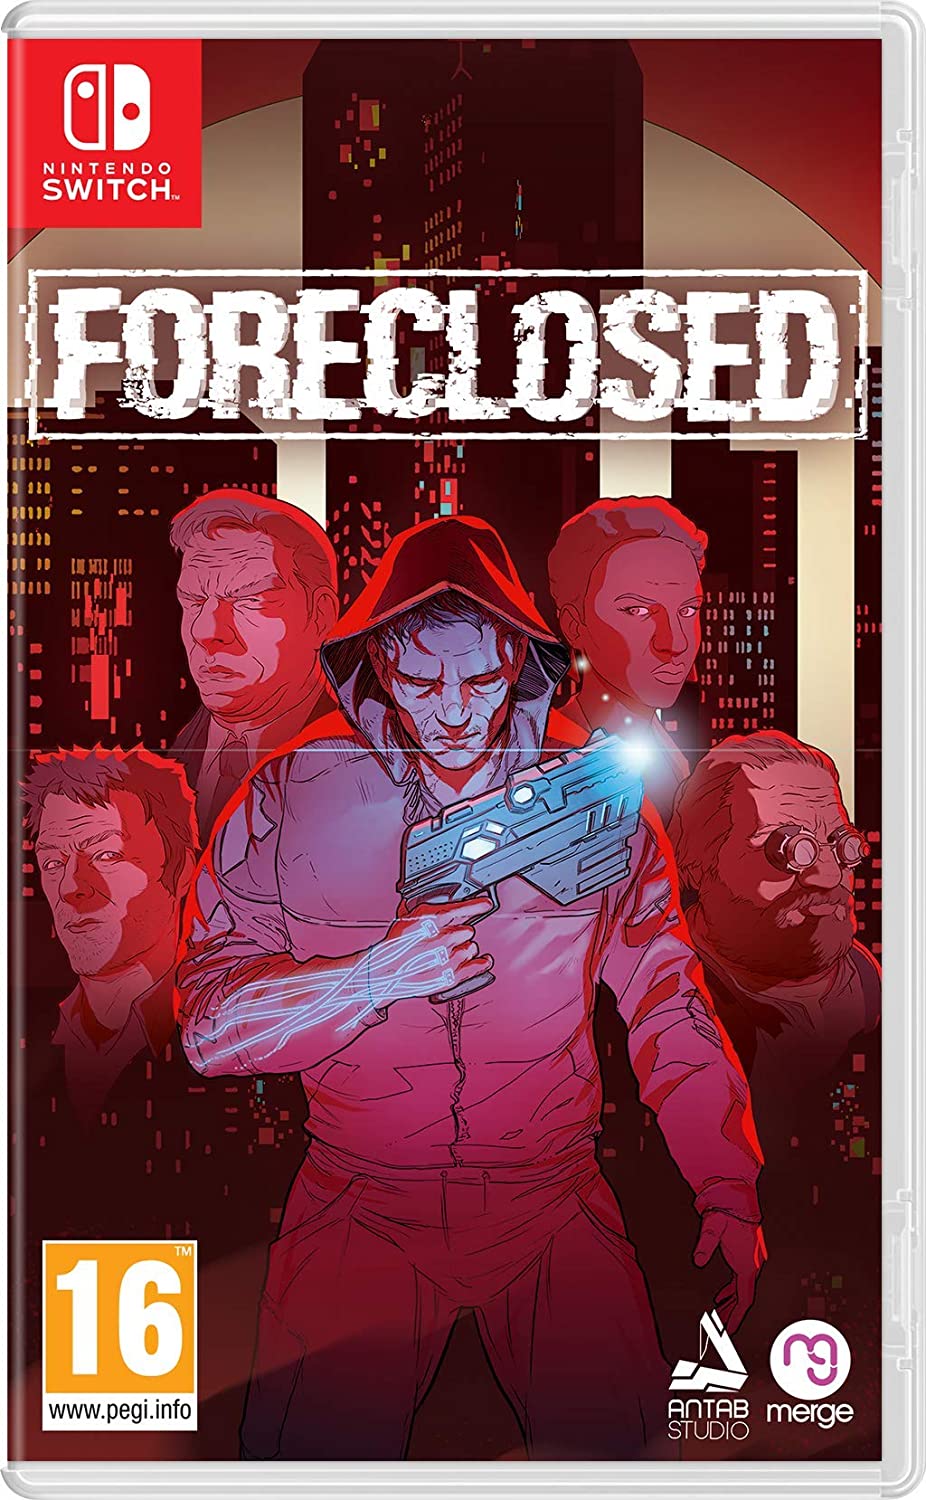 Foreclosed (Nintendo Switch)